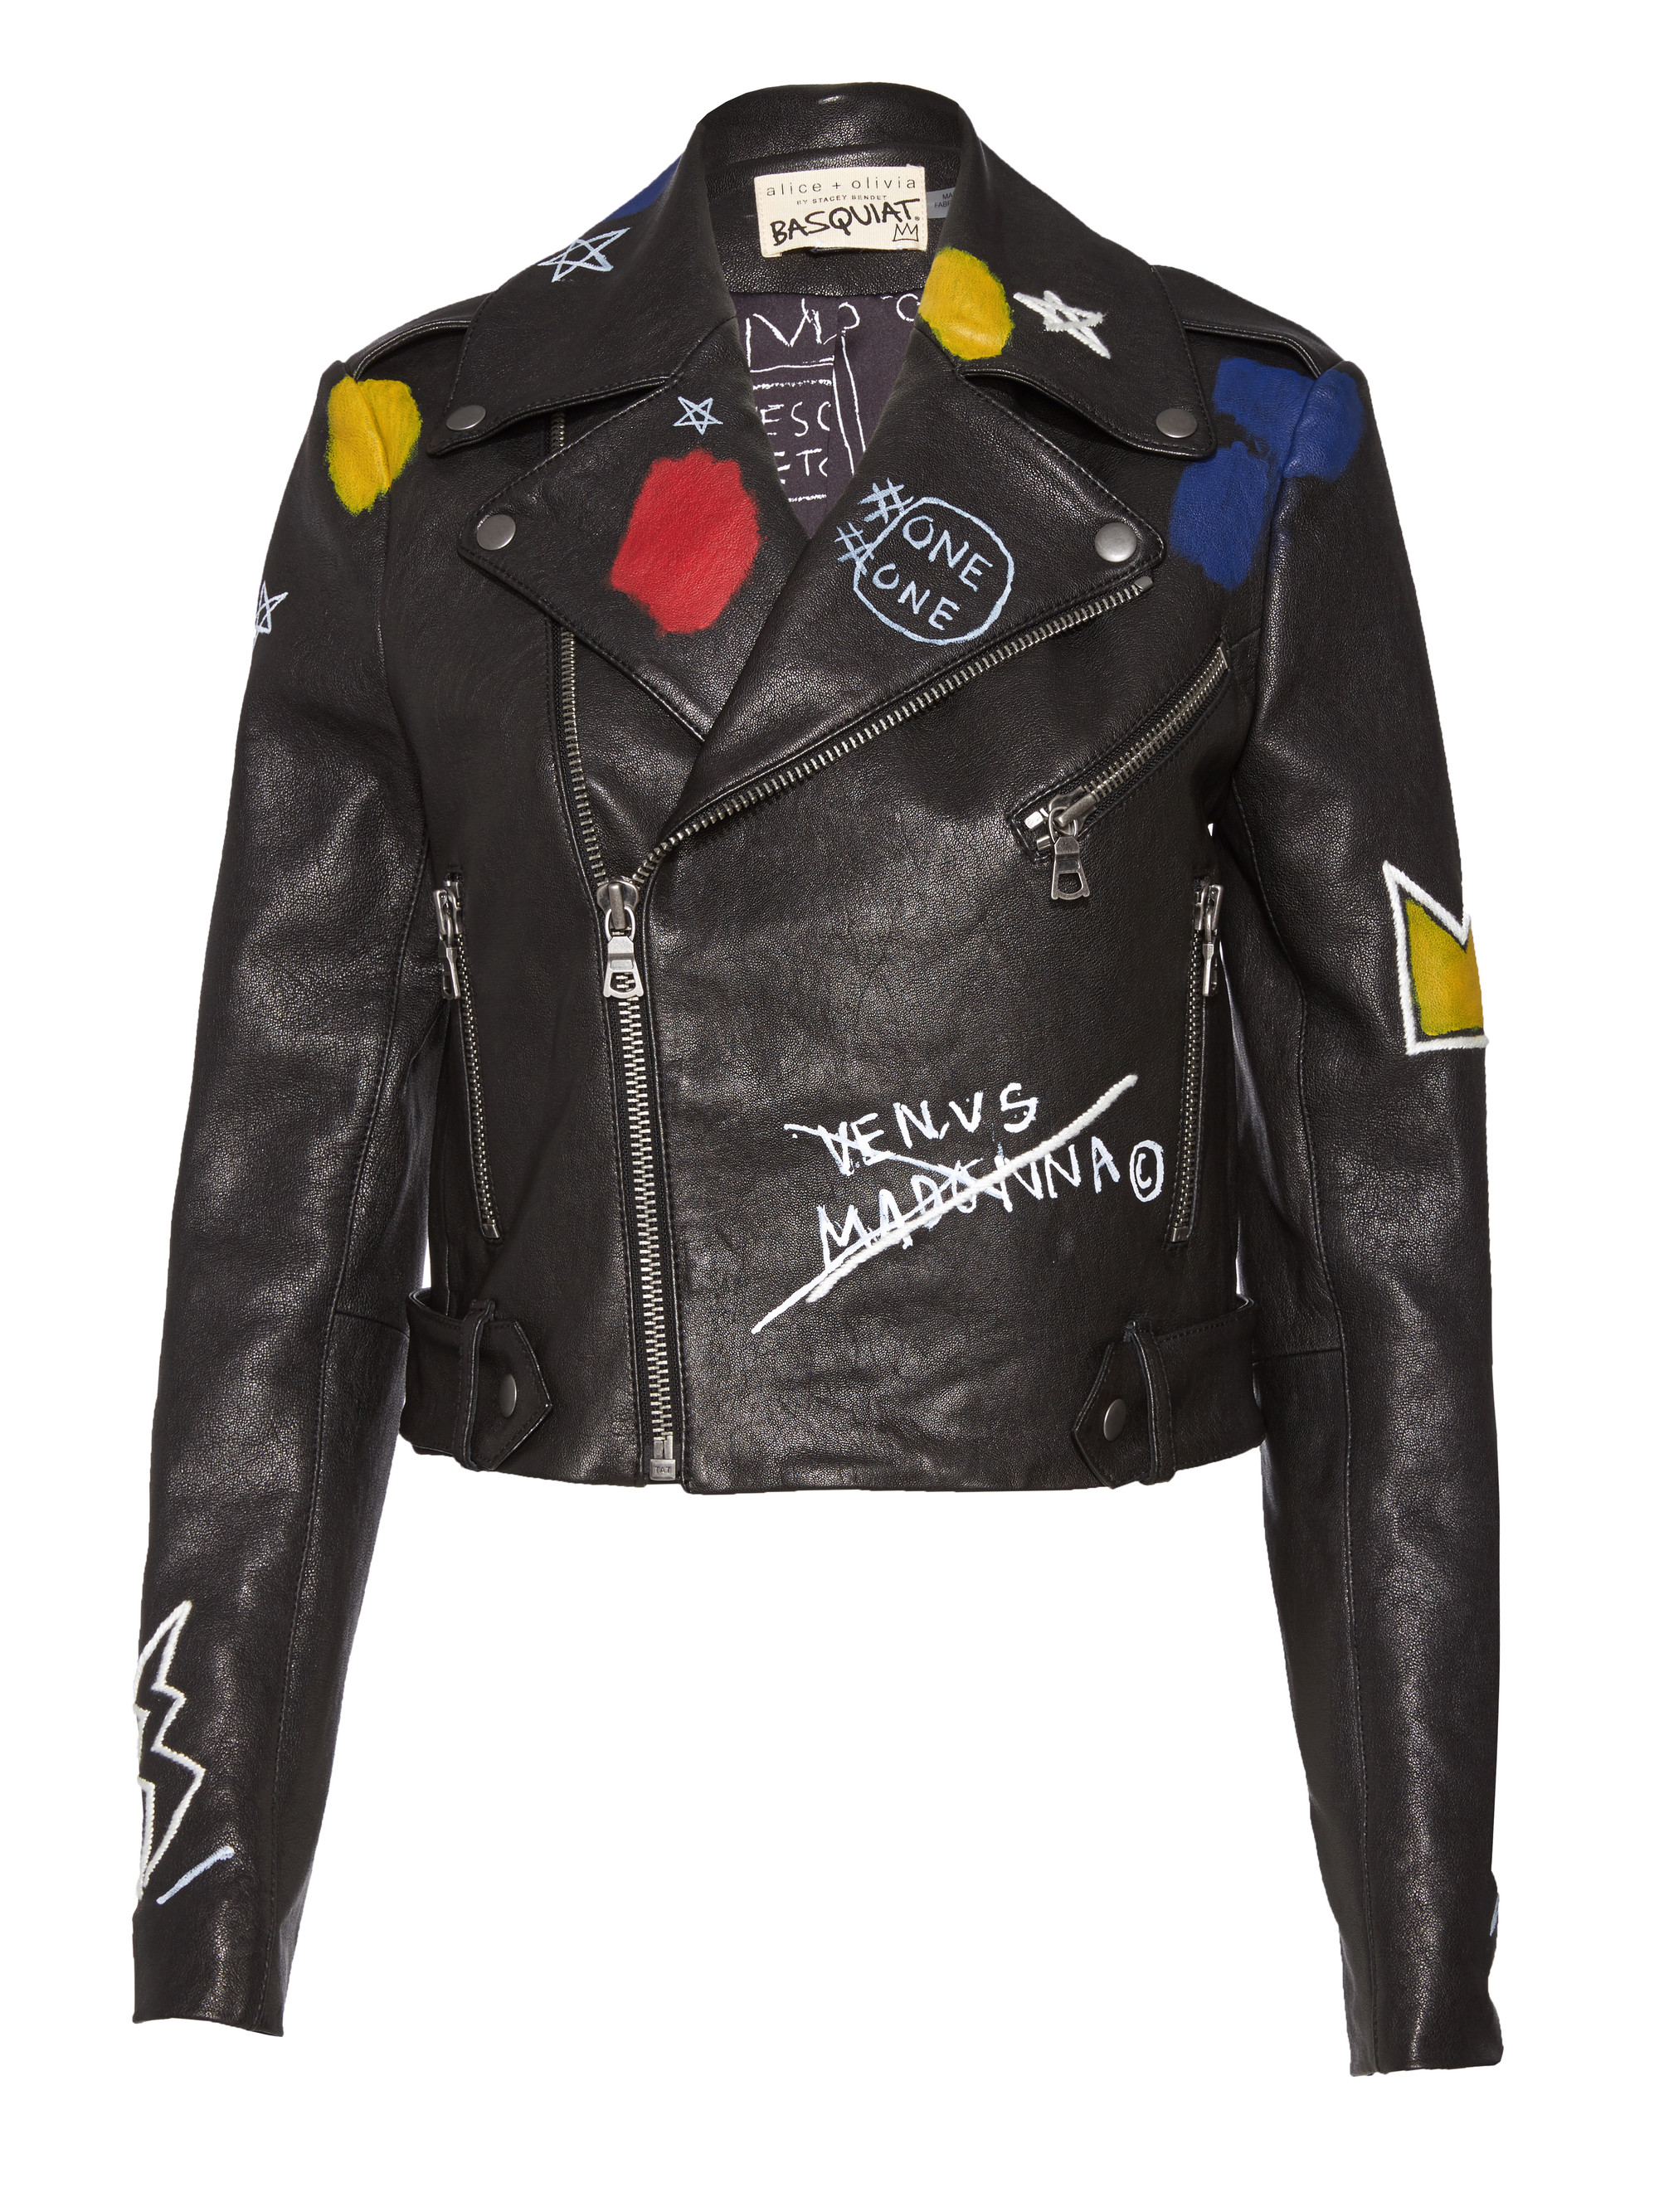 2000x2667 Show your arty side in an Alice + Olivia x Basquiat jacket